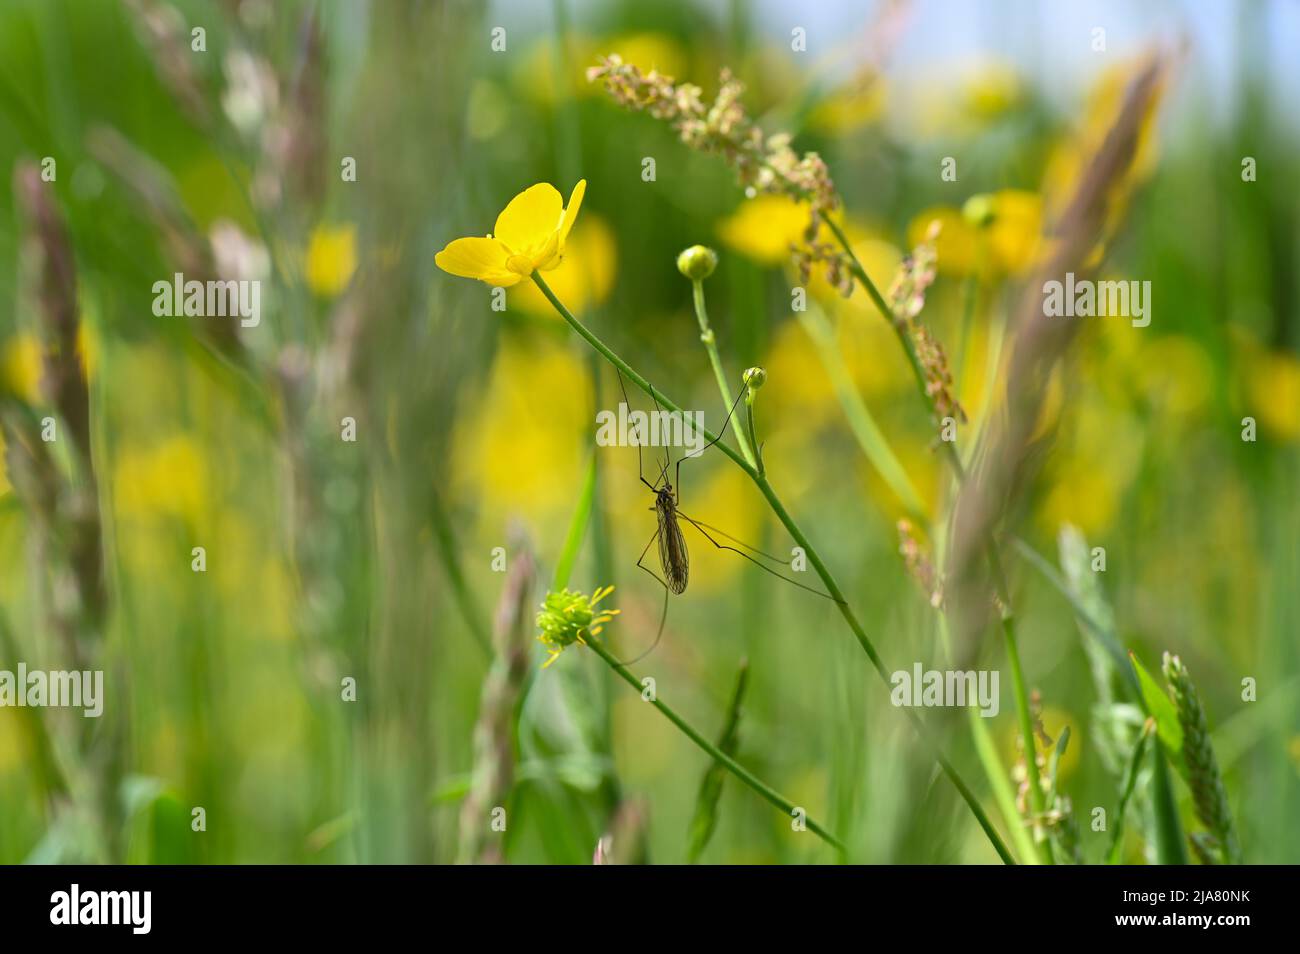 Meadow Crane - Large gnat on a buttercup in a green meadow Stock Photo